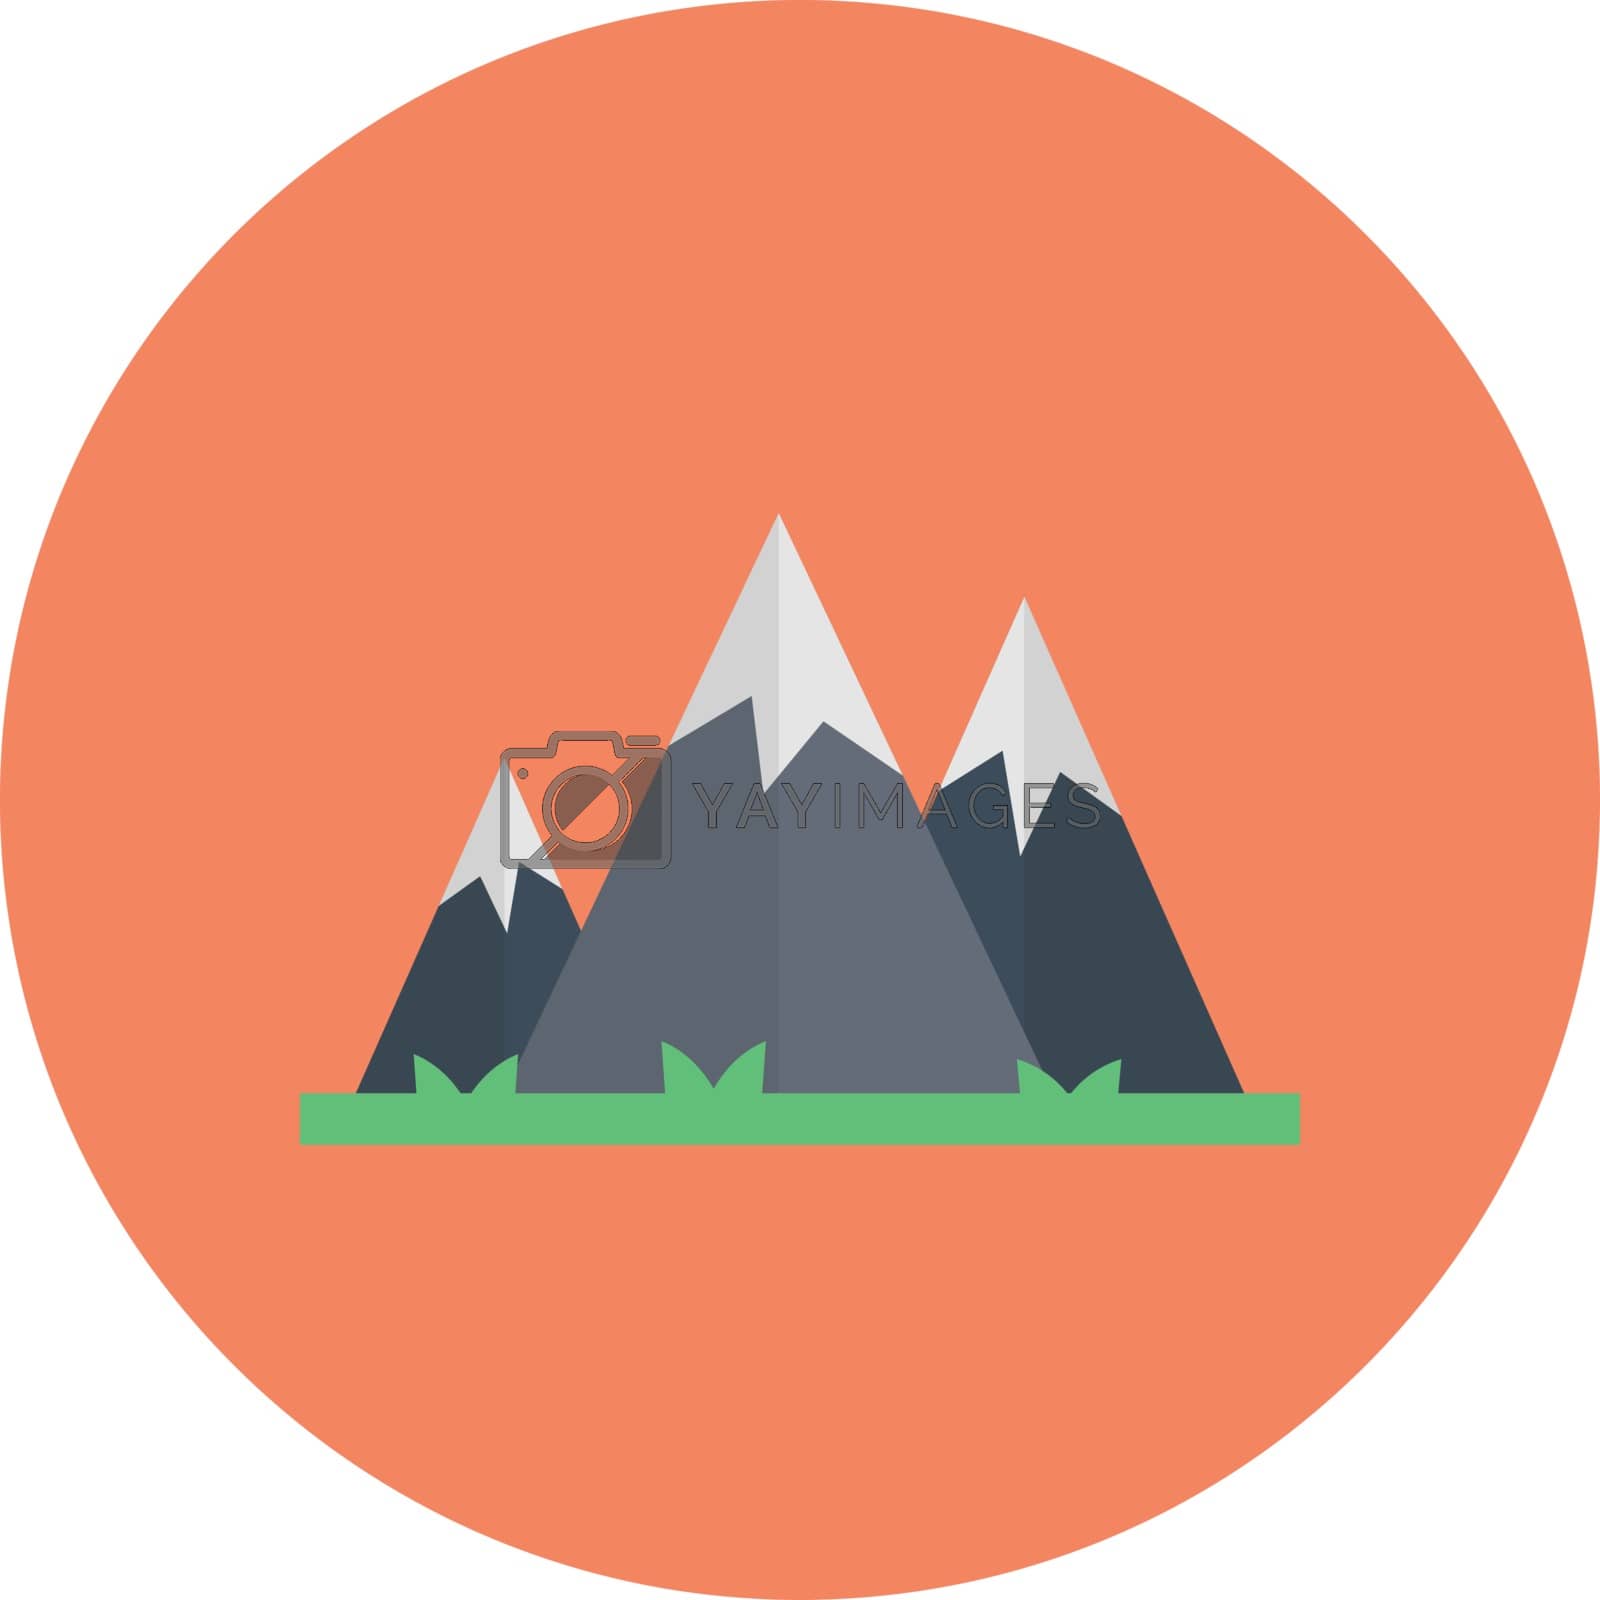 Royalty free image of hills by vectorstall